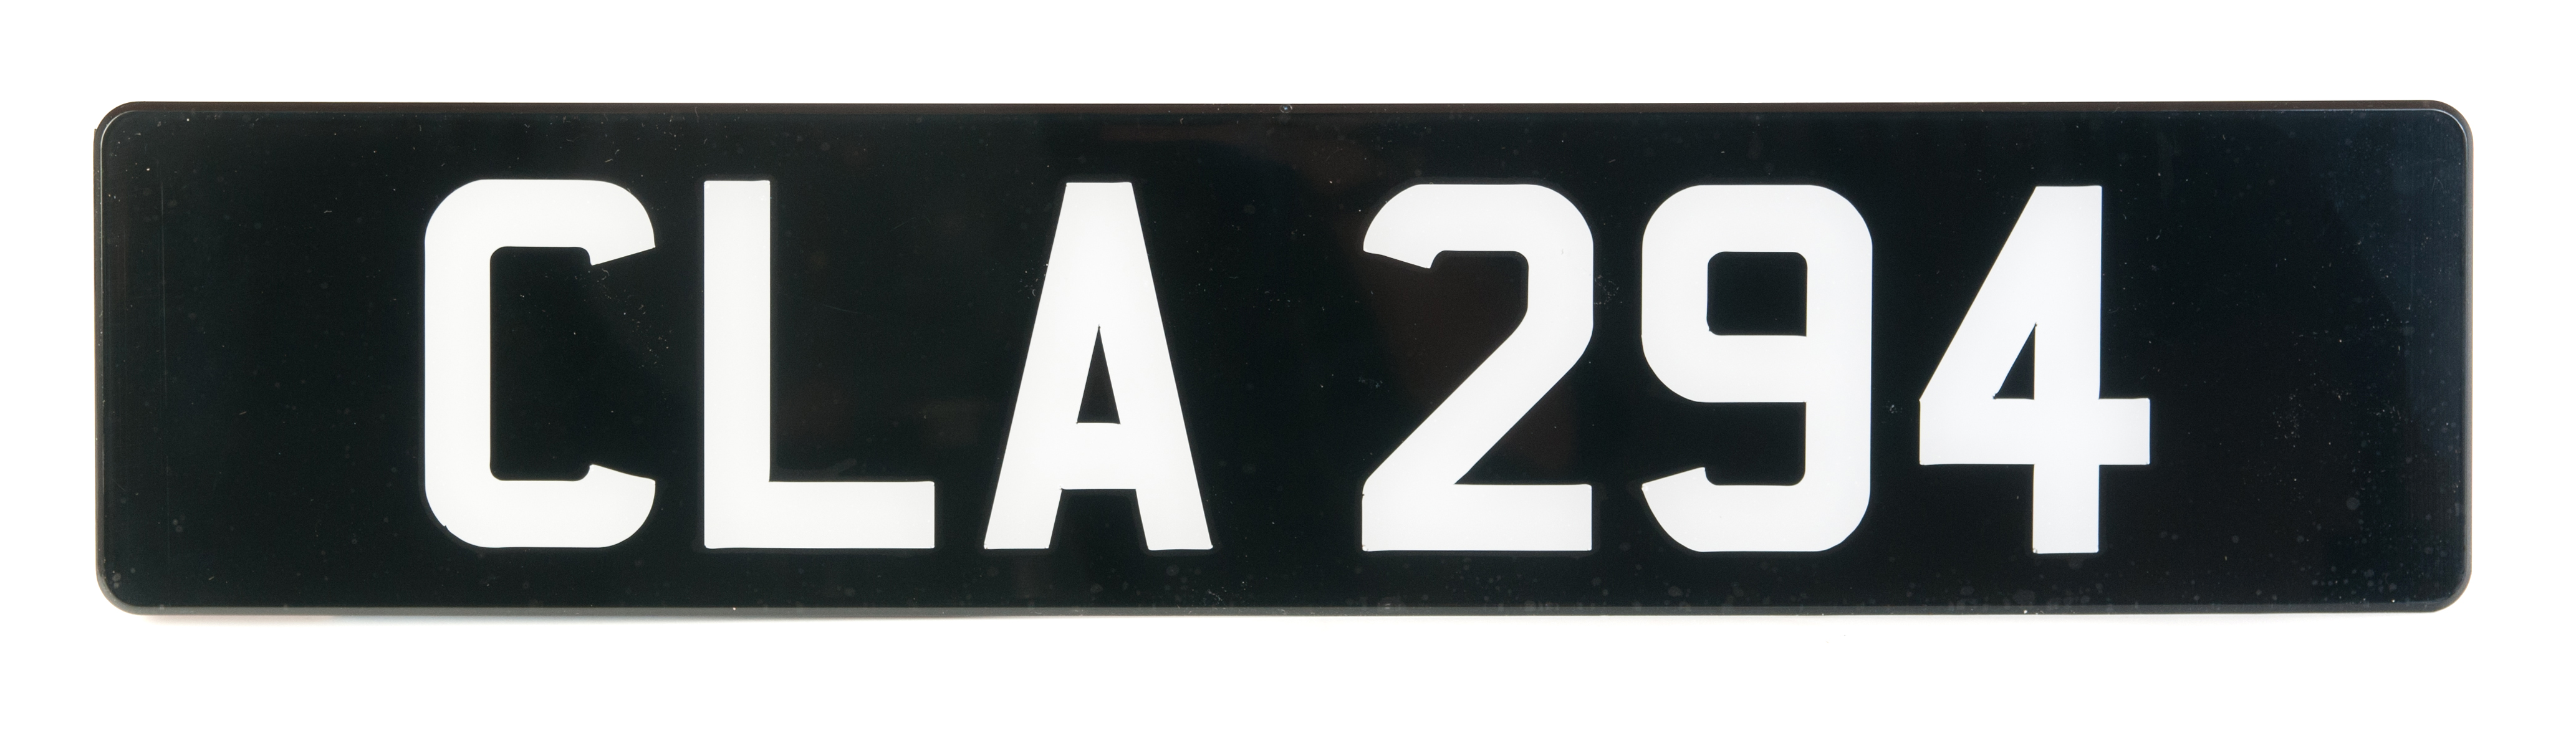 white-digits-on-black-acrylic-number-plates-classic-plates-online